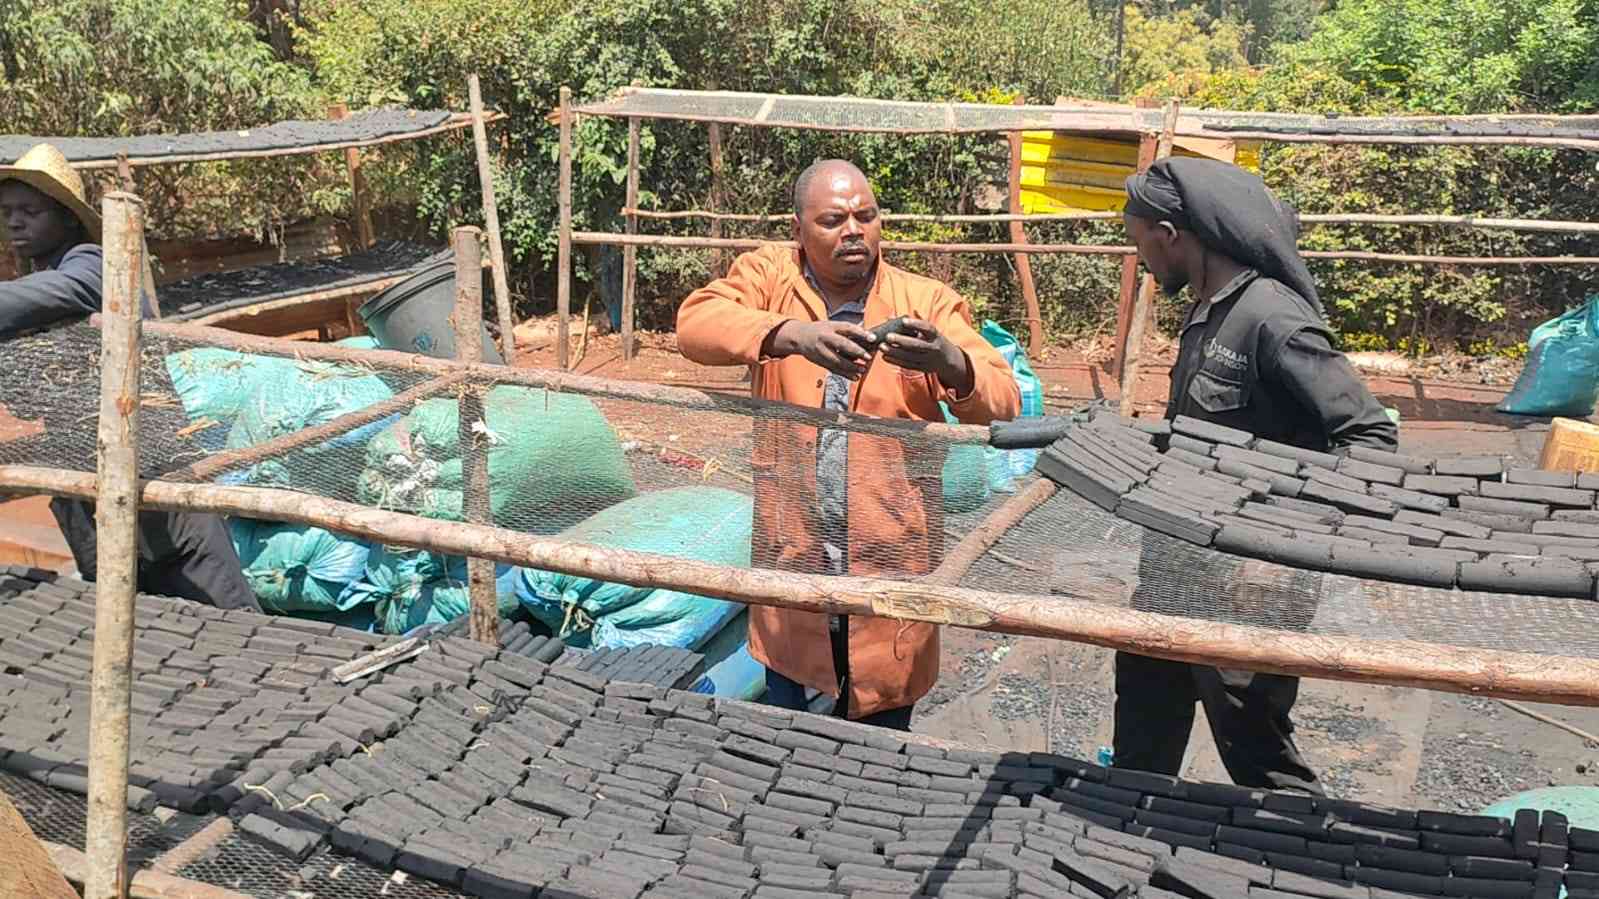 Cashing in on waste: Charcoal-making yard